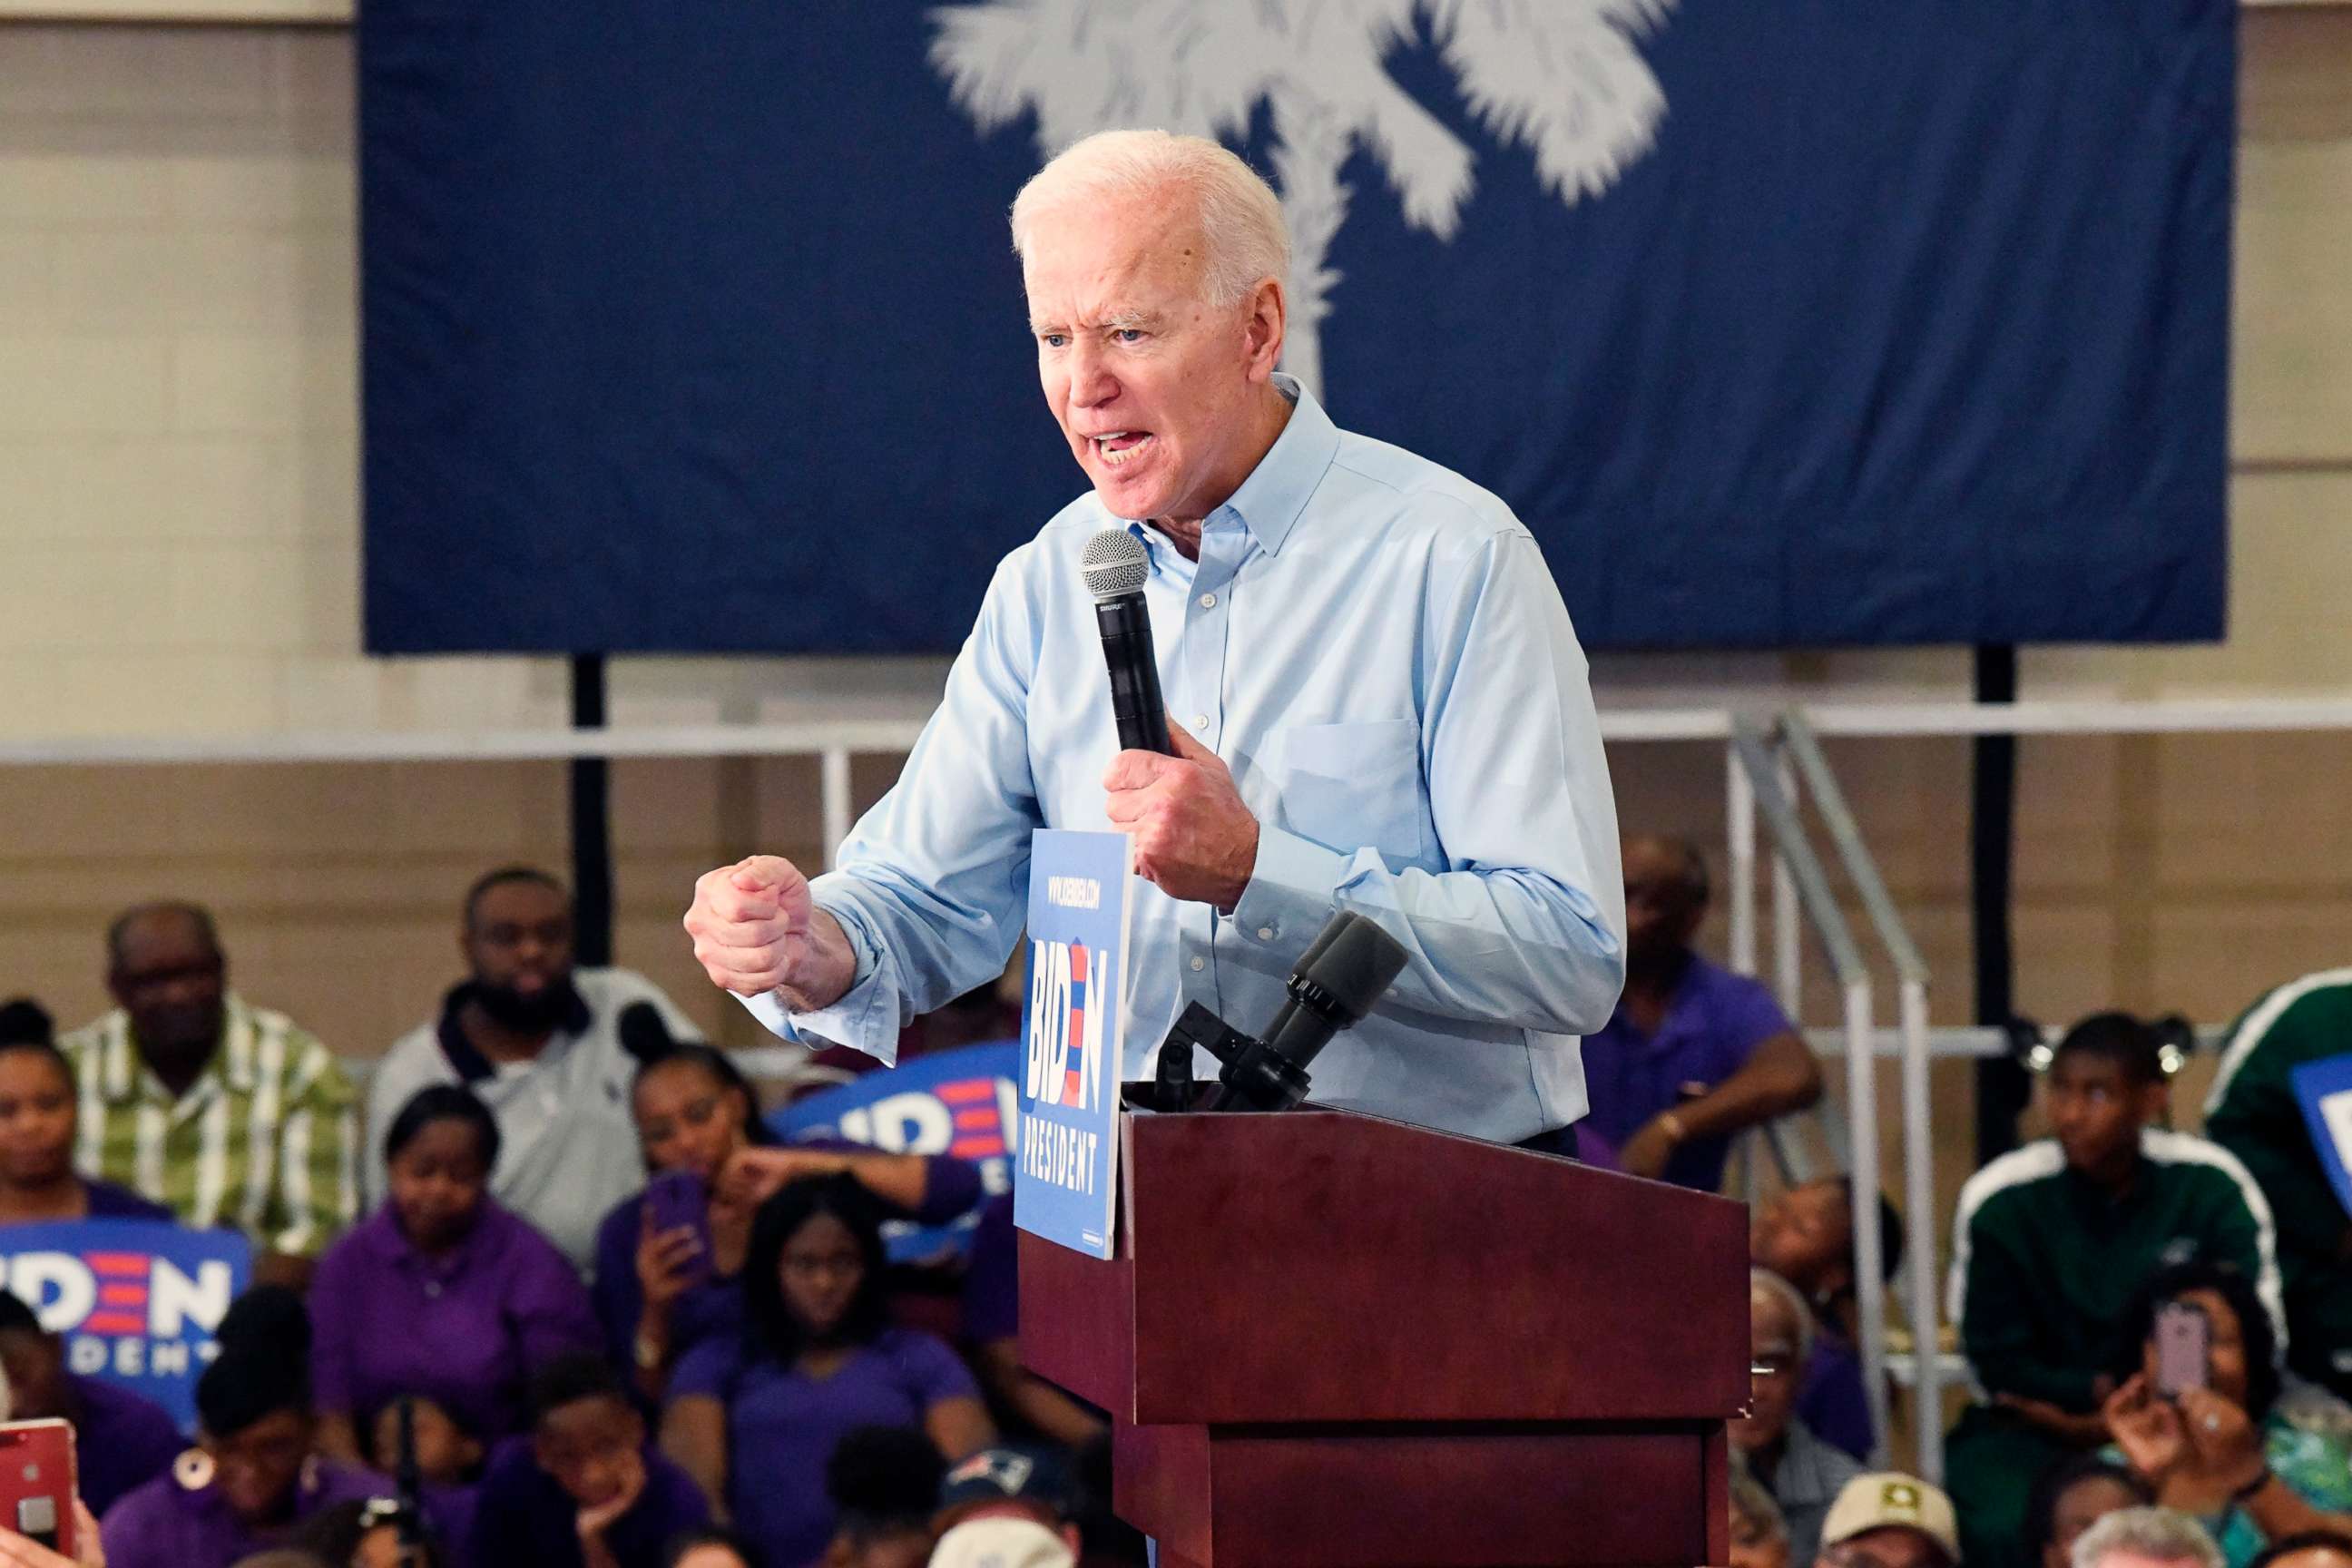 PHOTO: Former Vice President Joe Biden speaks at the first rally of his 2020 campaign, Saturday, May 4, 2019, in Columbia, S.C.